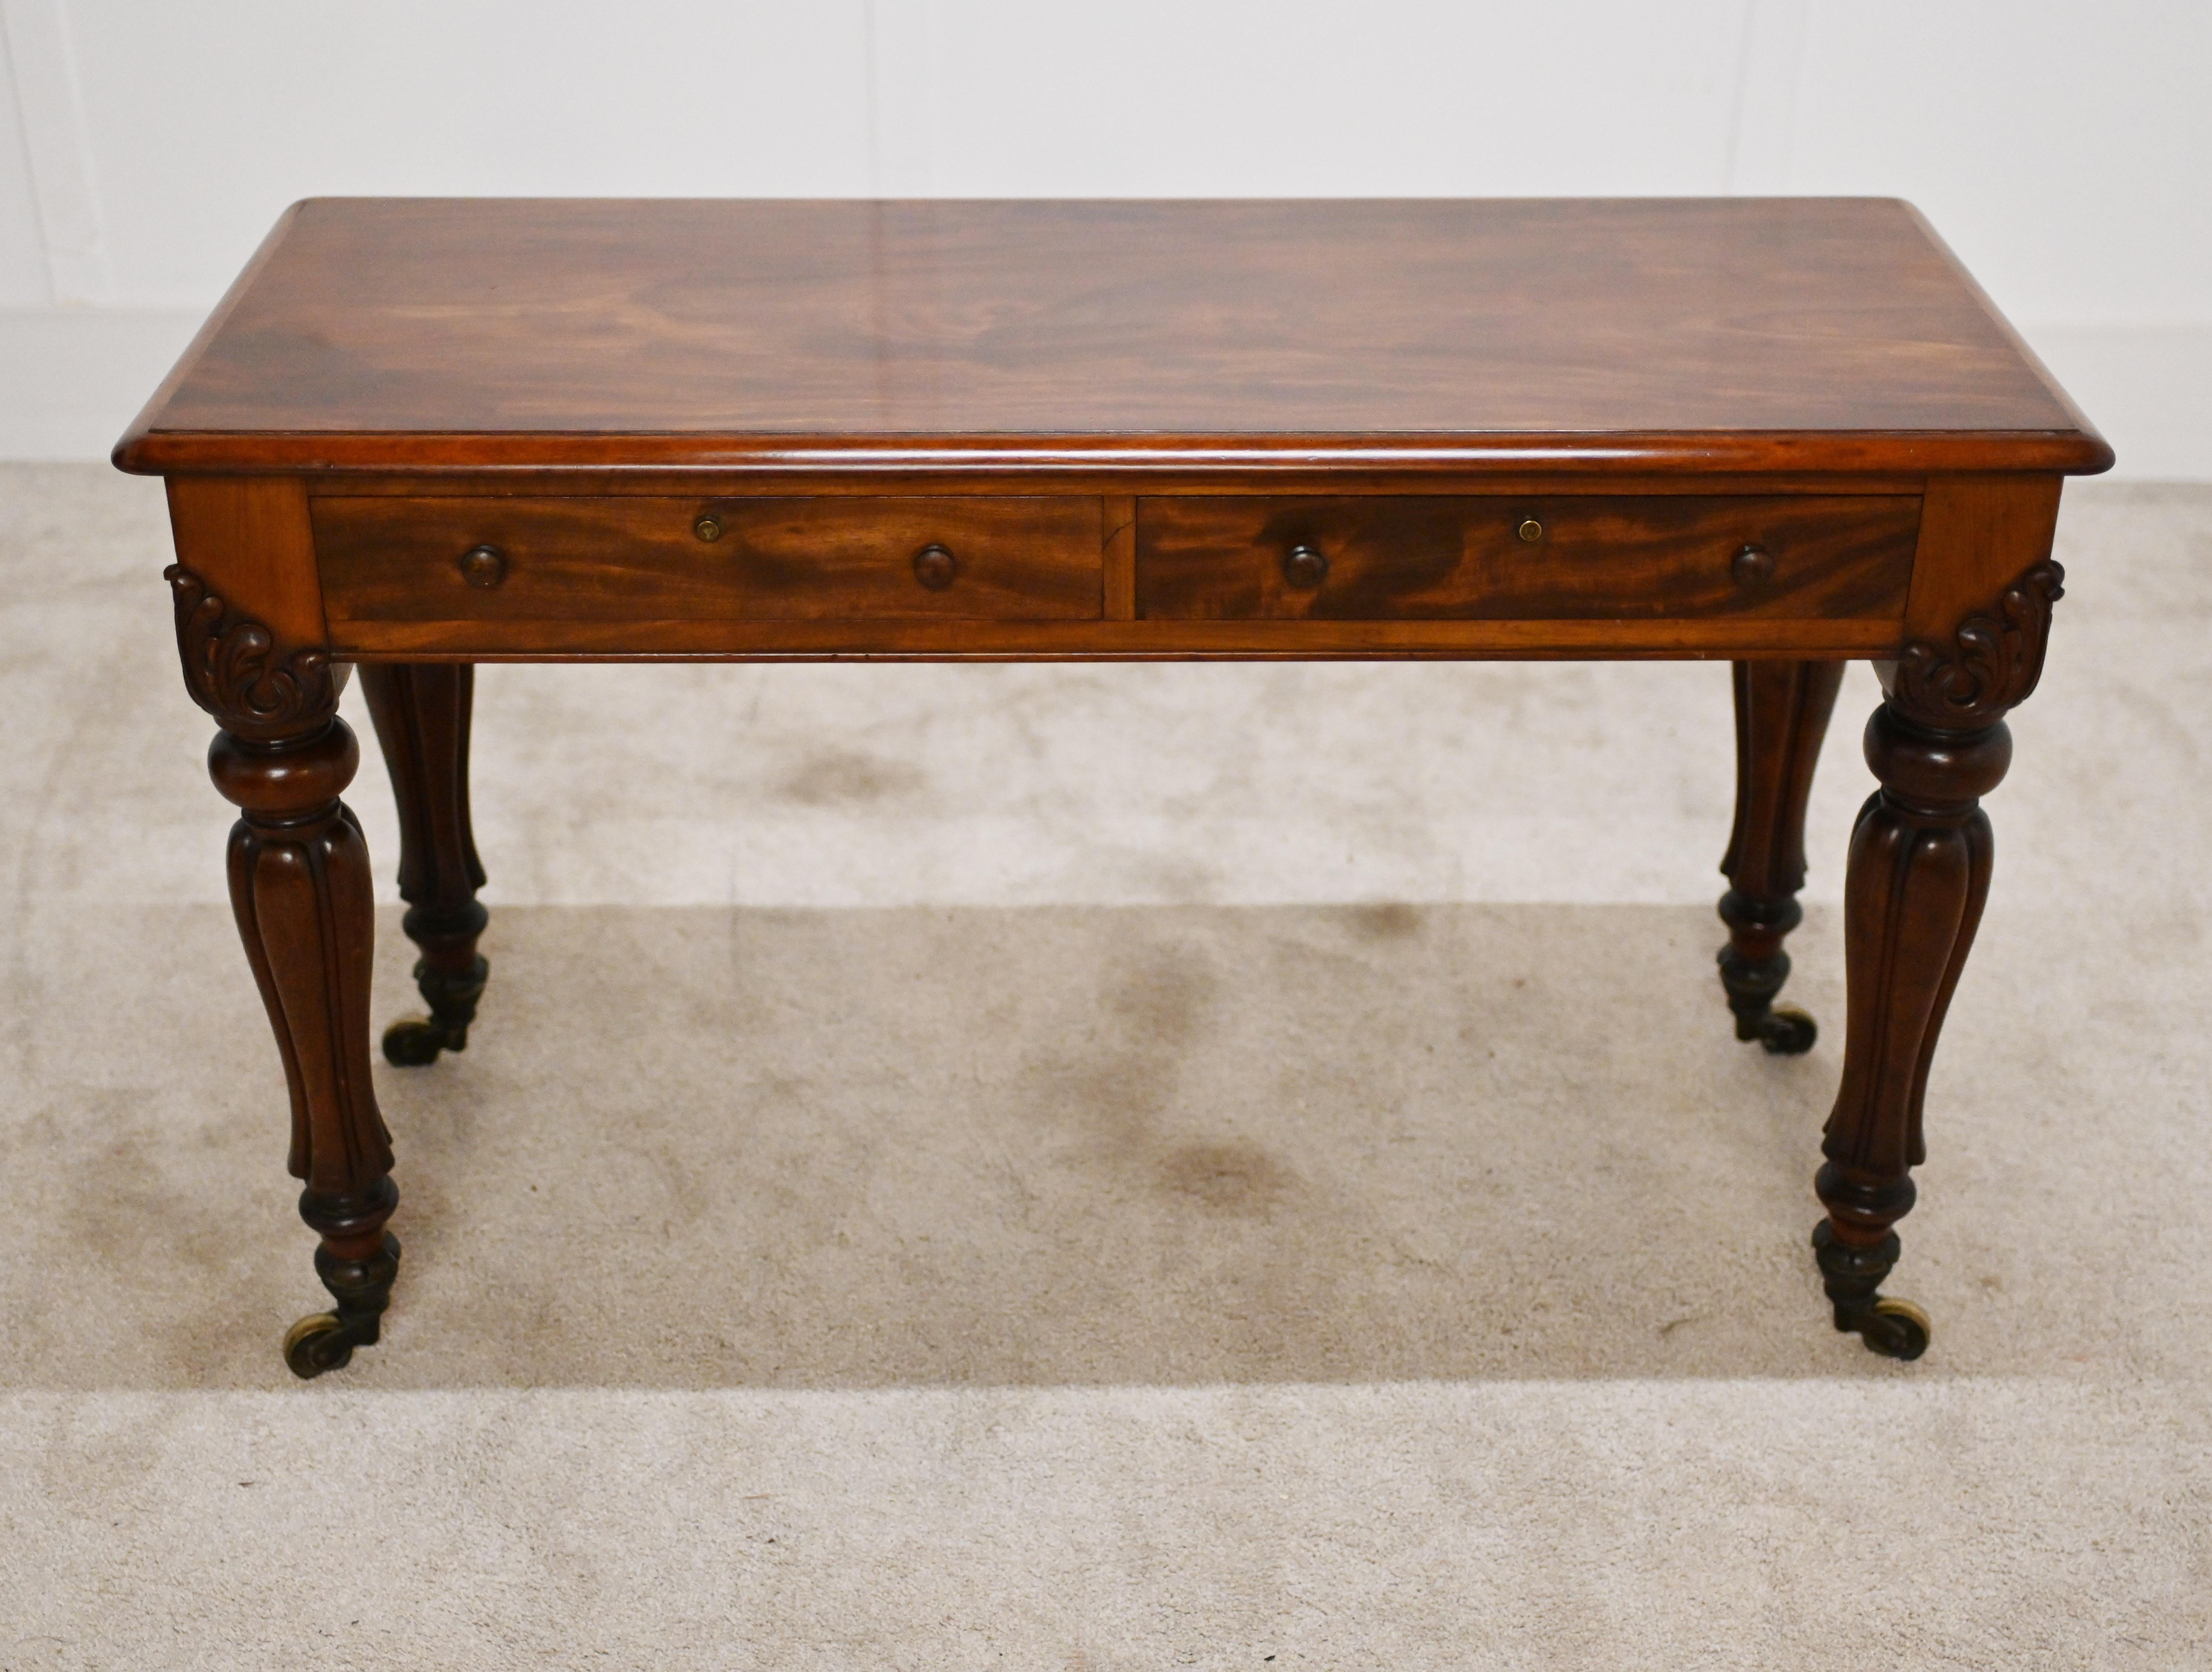 Victorian Mahogany Desk Hamptons and Sons London 1840 In Good Condition For Sale In Potters Bar, GB